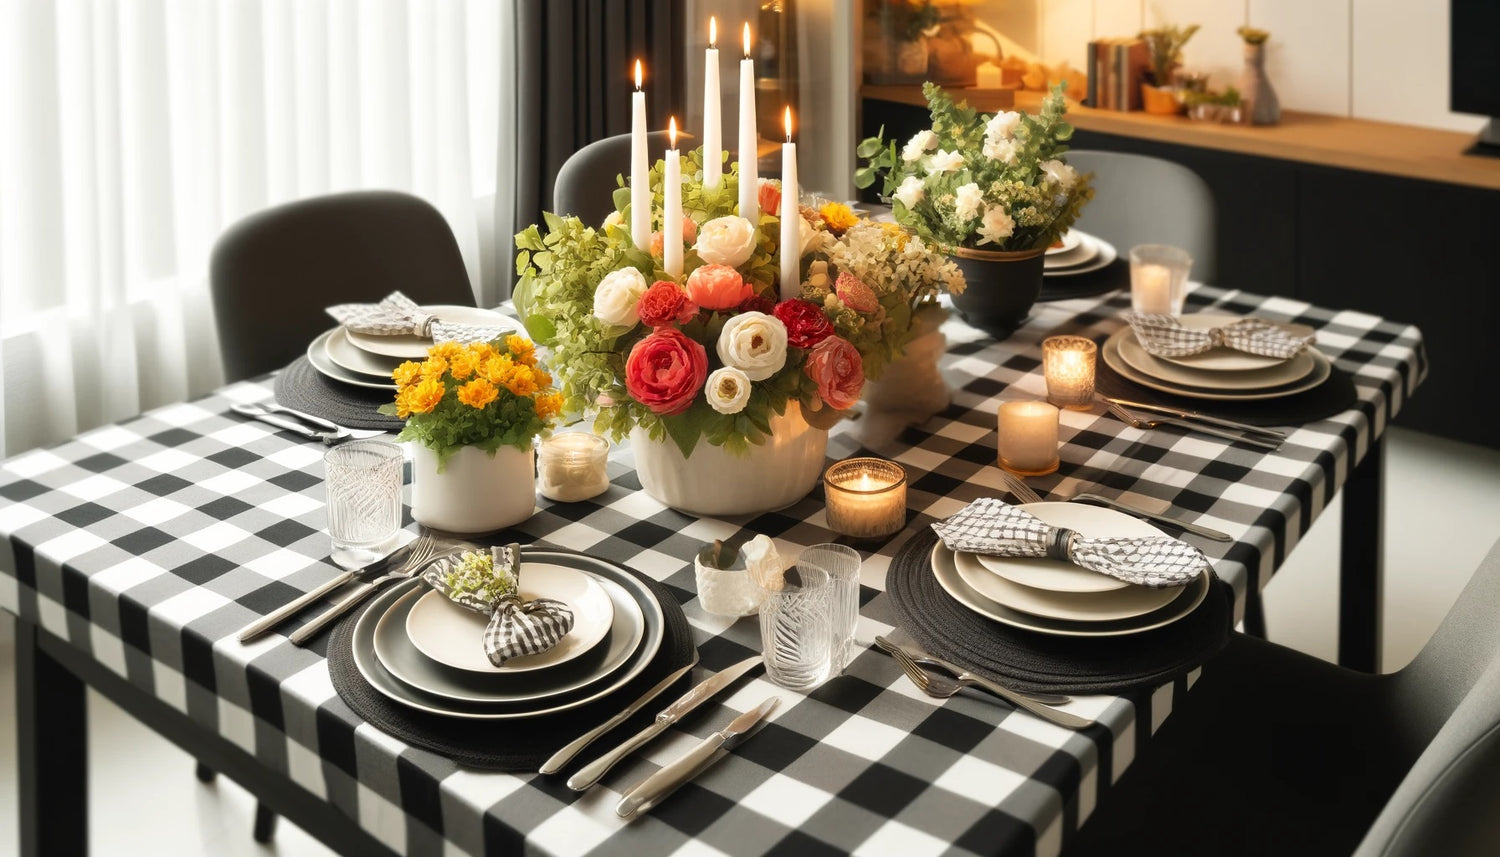 Colorful checkered tablecloth for a casual dining setting